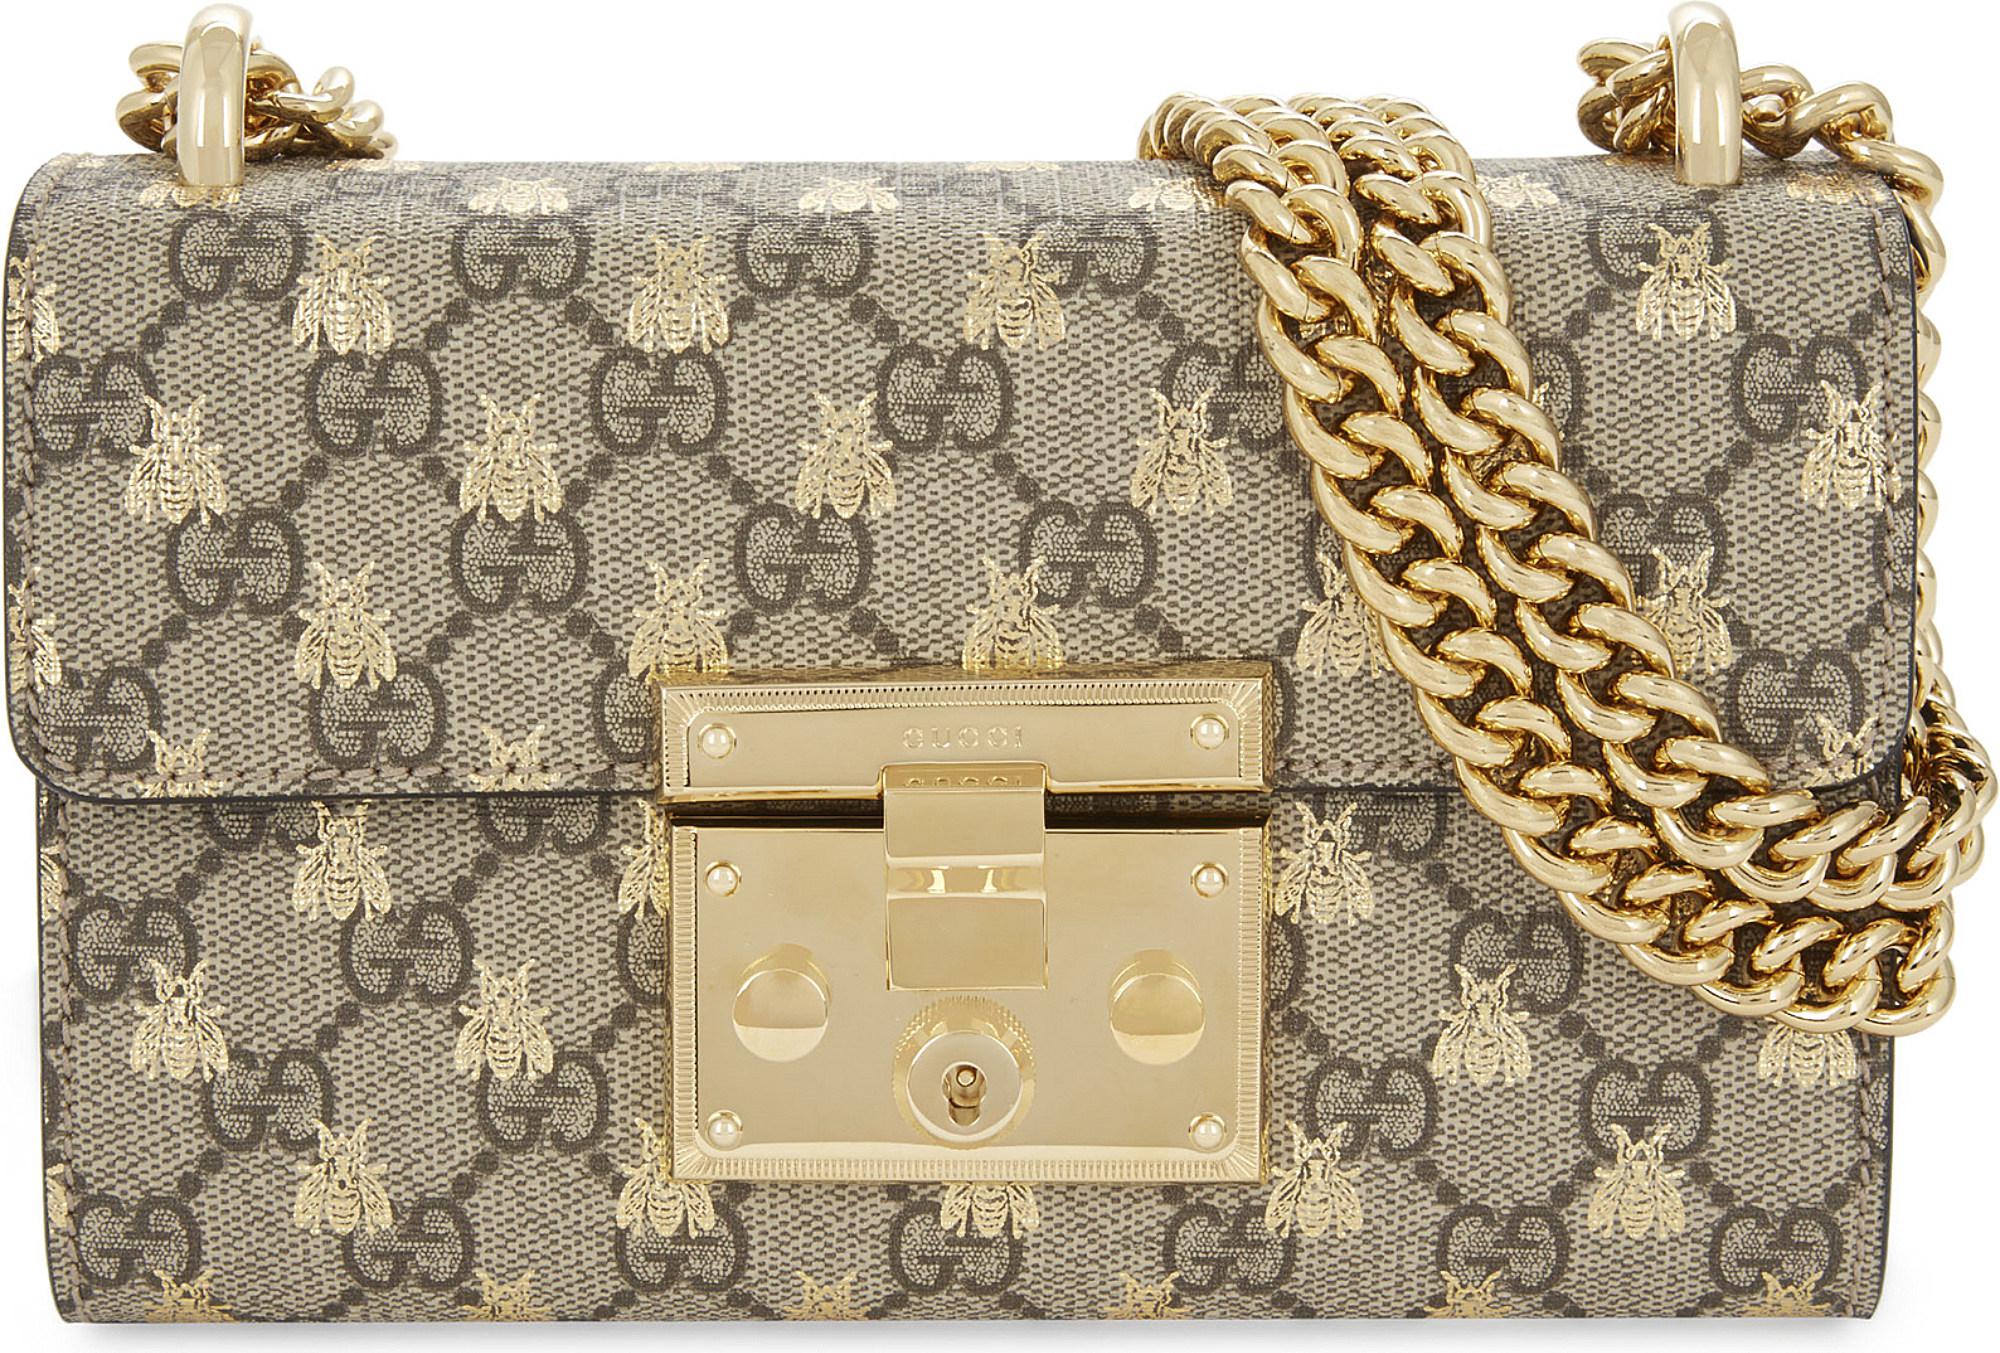 Gucci Small Gg Supreme Canvas And Leather Bee Motif Cross-body Bag in Natural - Lyst